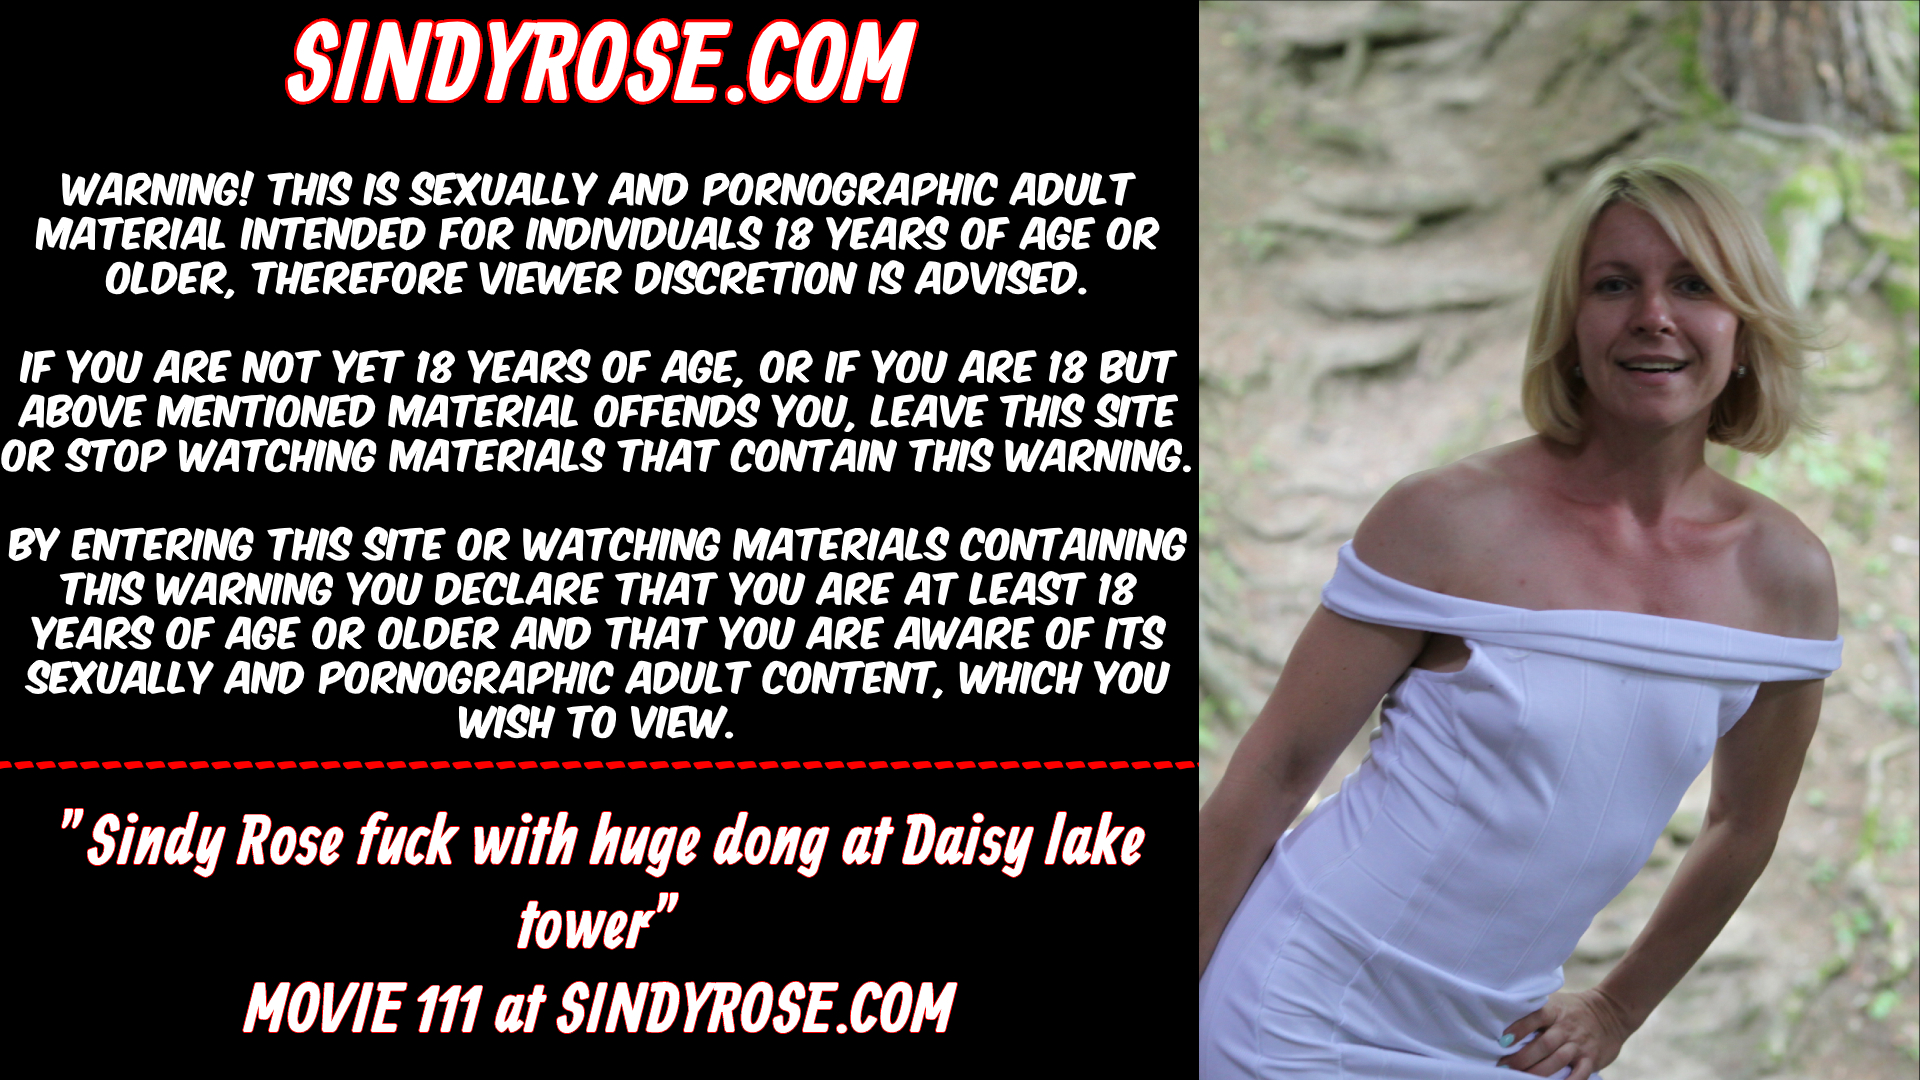 Sindy Rose fuck with huge dong at Daisy lake tower